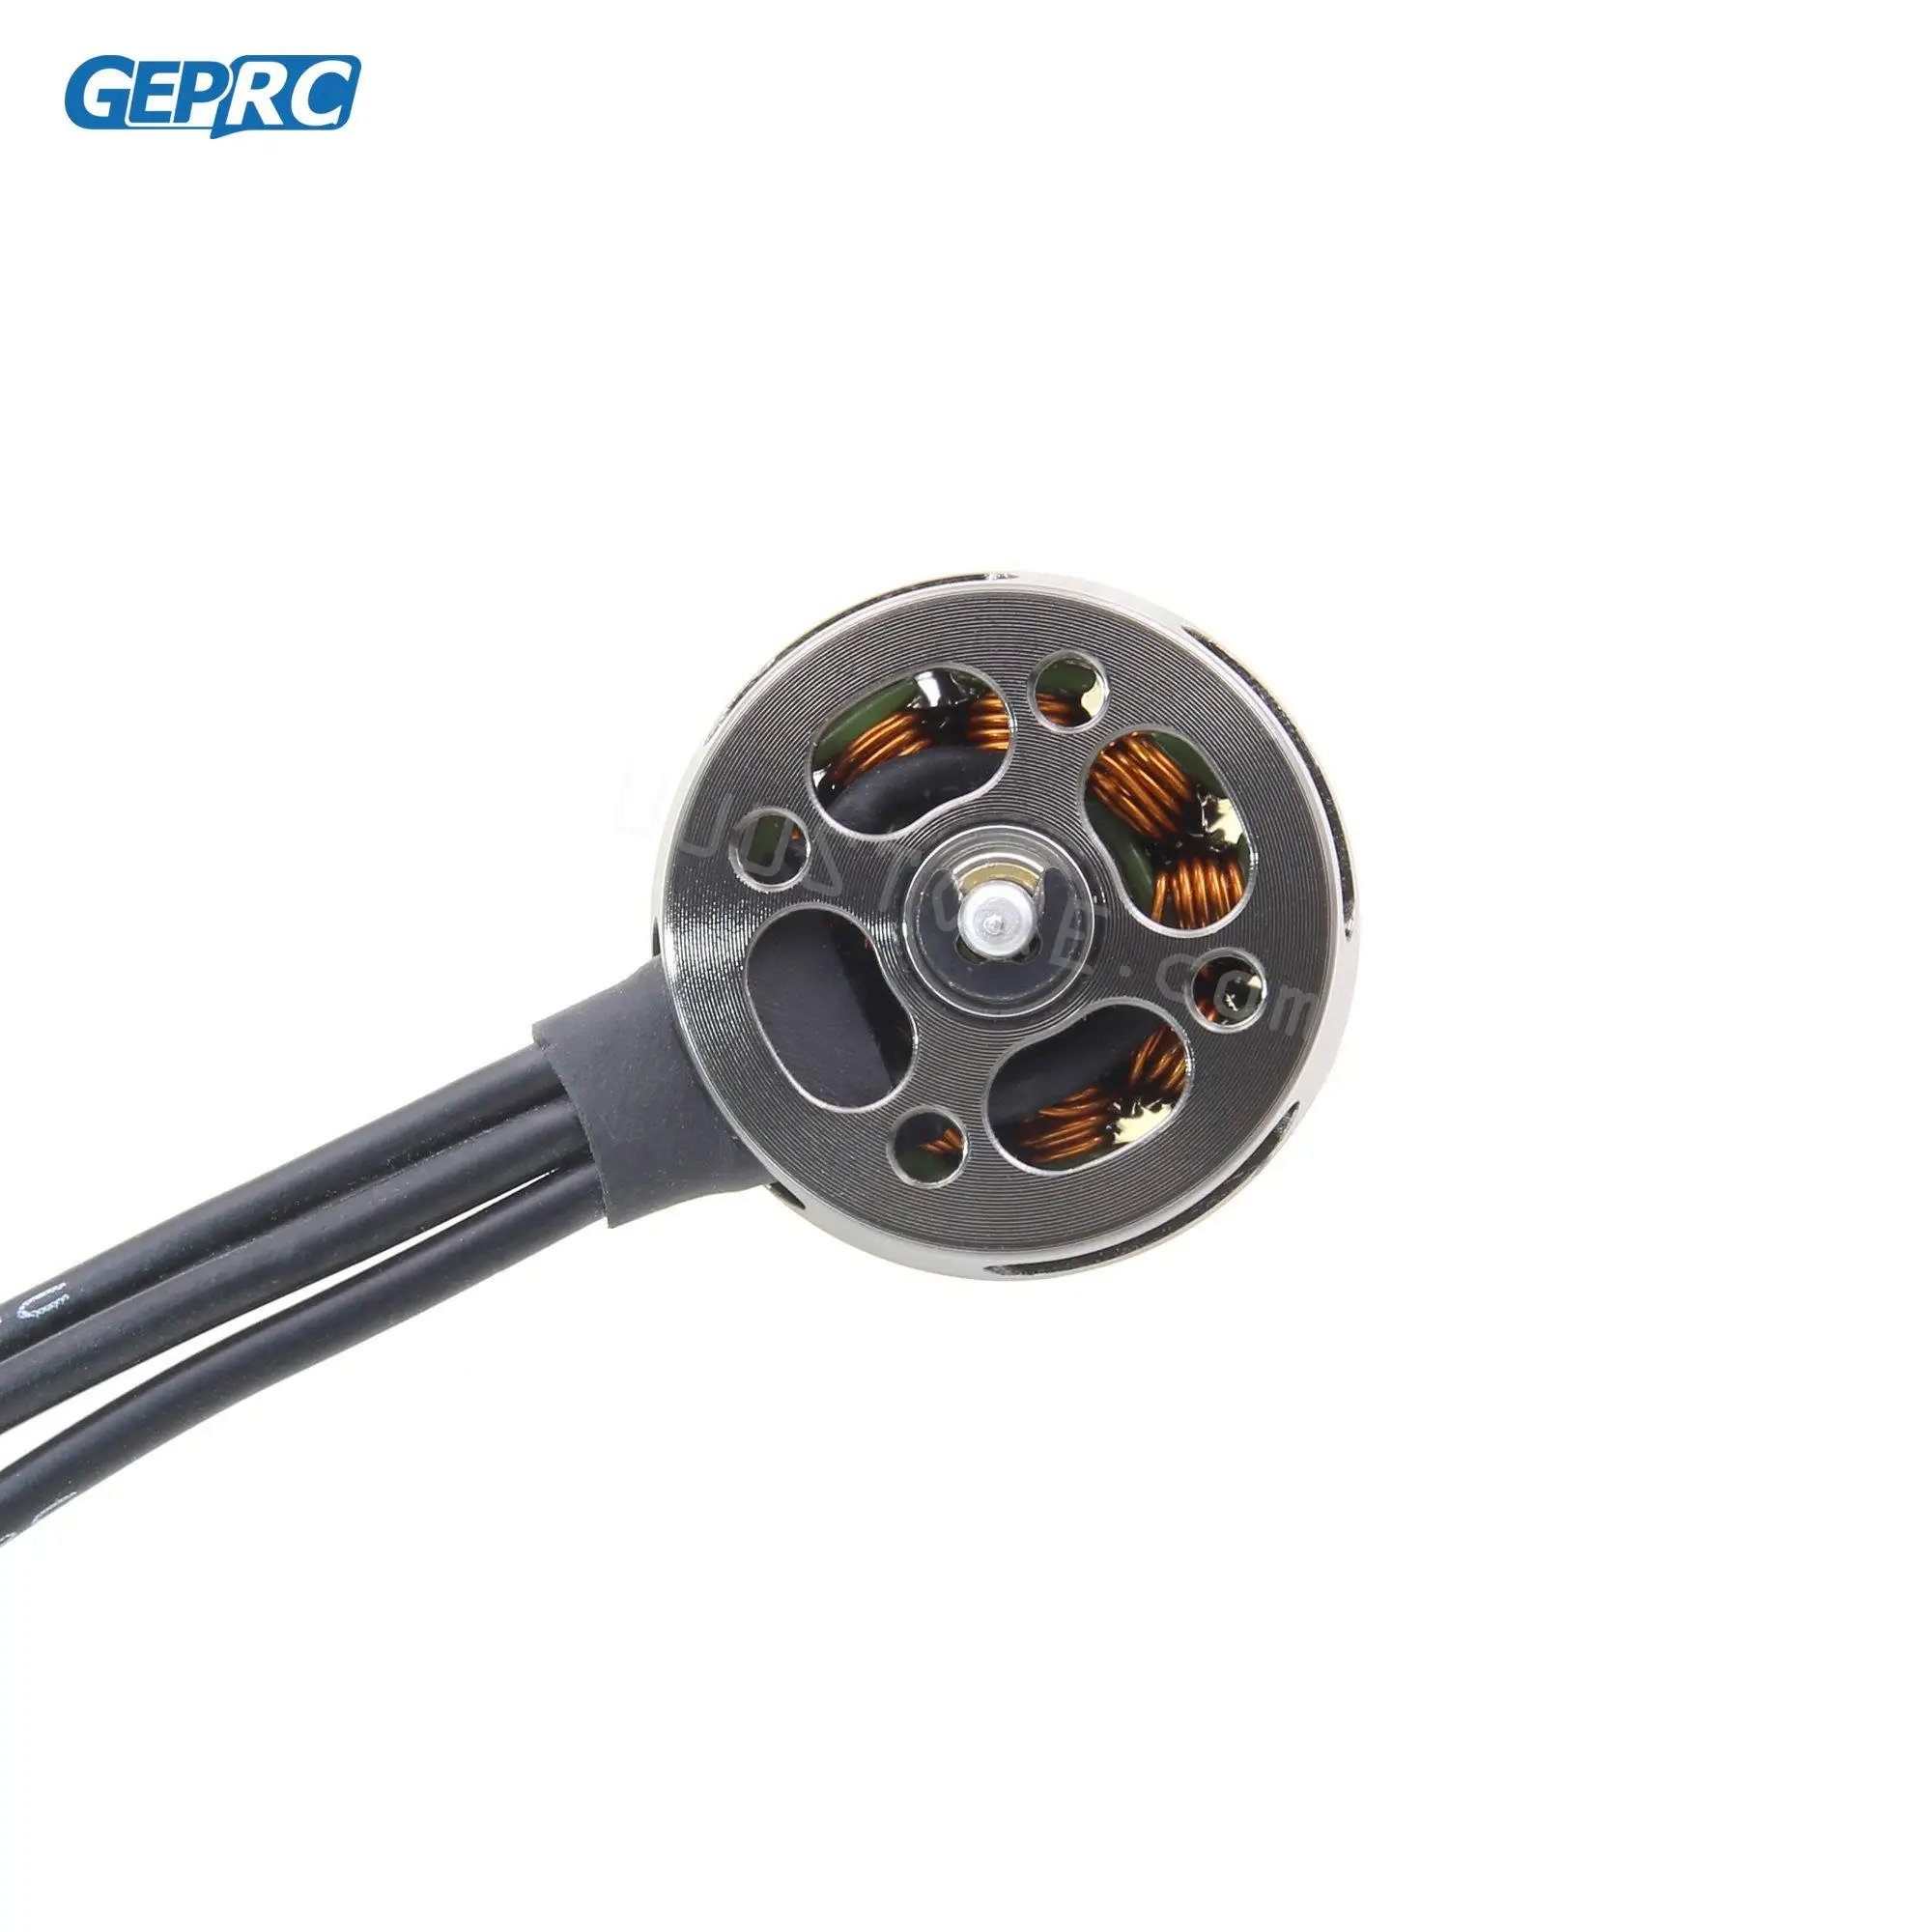 GEPRC GR1408 3500KV 2500KV 2-4S Brushless Motor for 3inch RC FPV Racing Freestyle Cinewhoop Ducted Drones DIY Parts 4